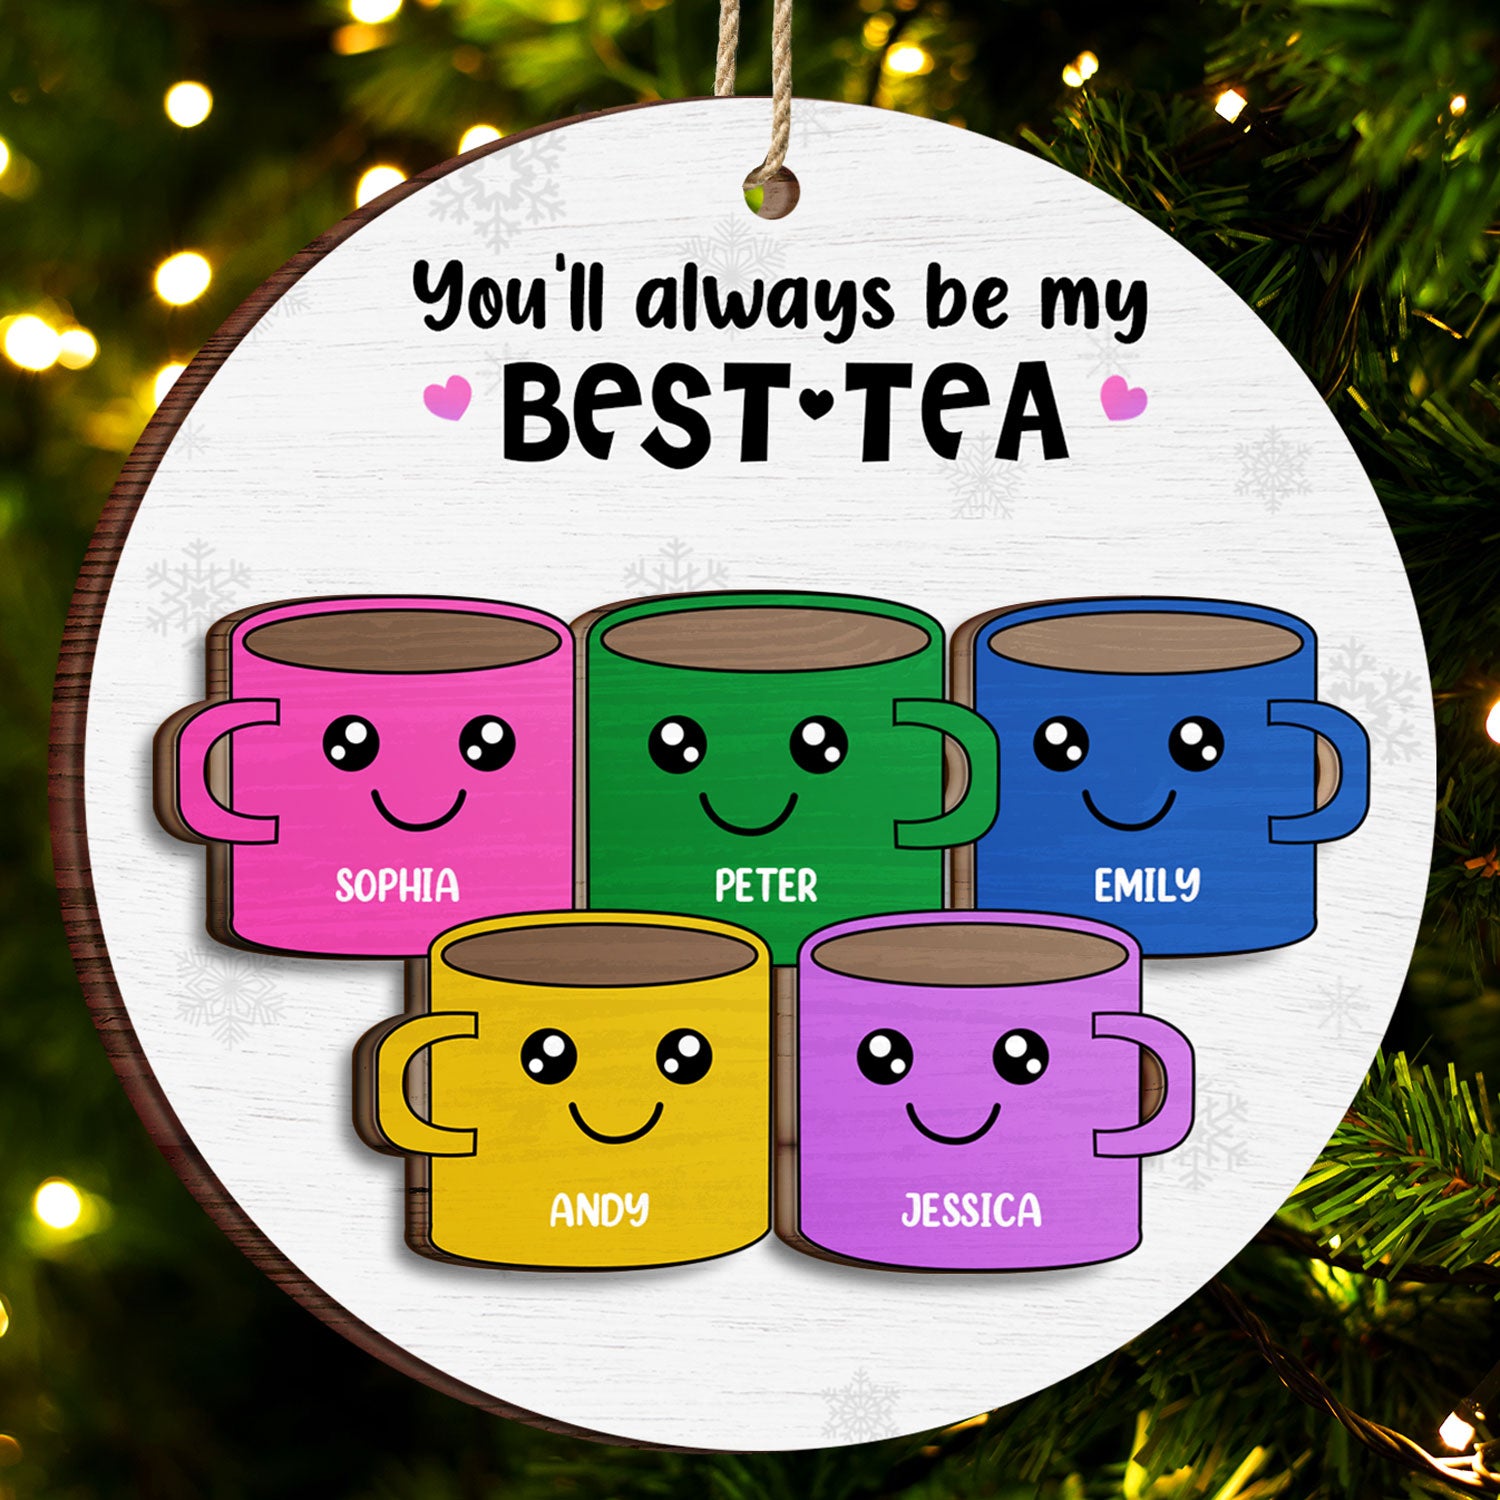 You'll Always Be My Best-Tea - Christmas Gift For Besties, BFF Best Friends - Personalized 2-Layered Wooden Ornament